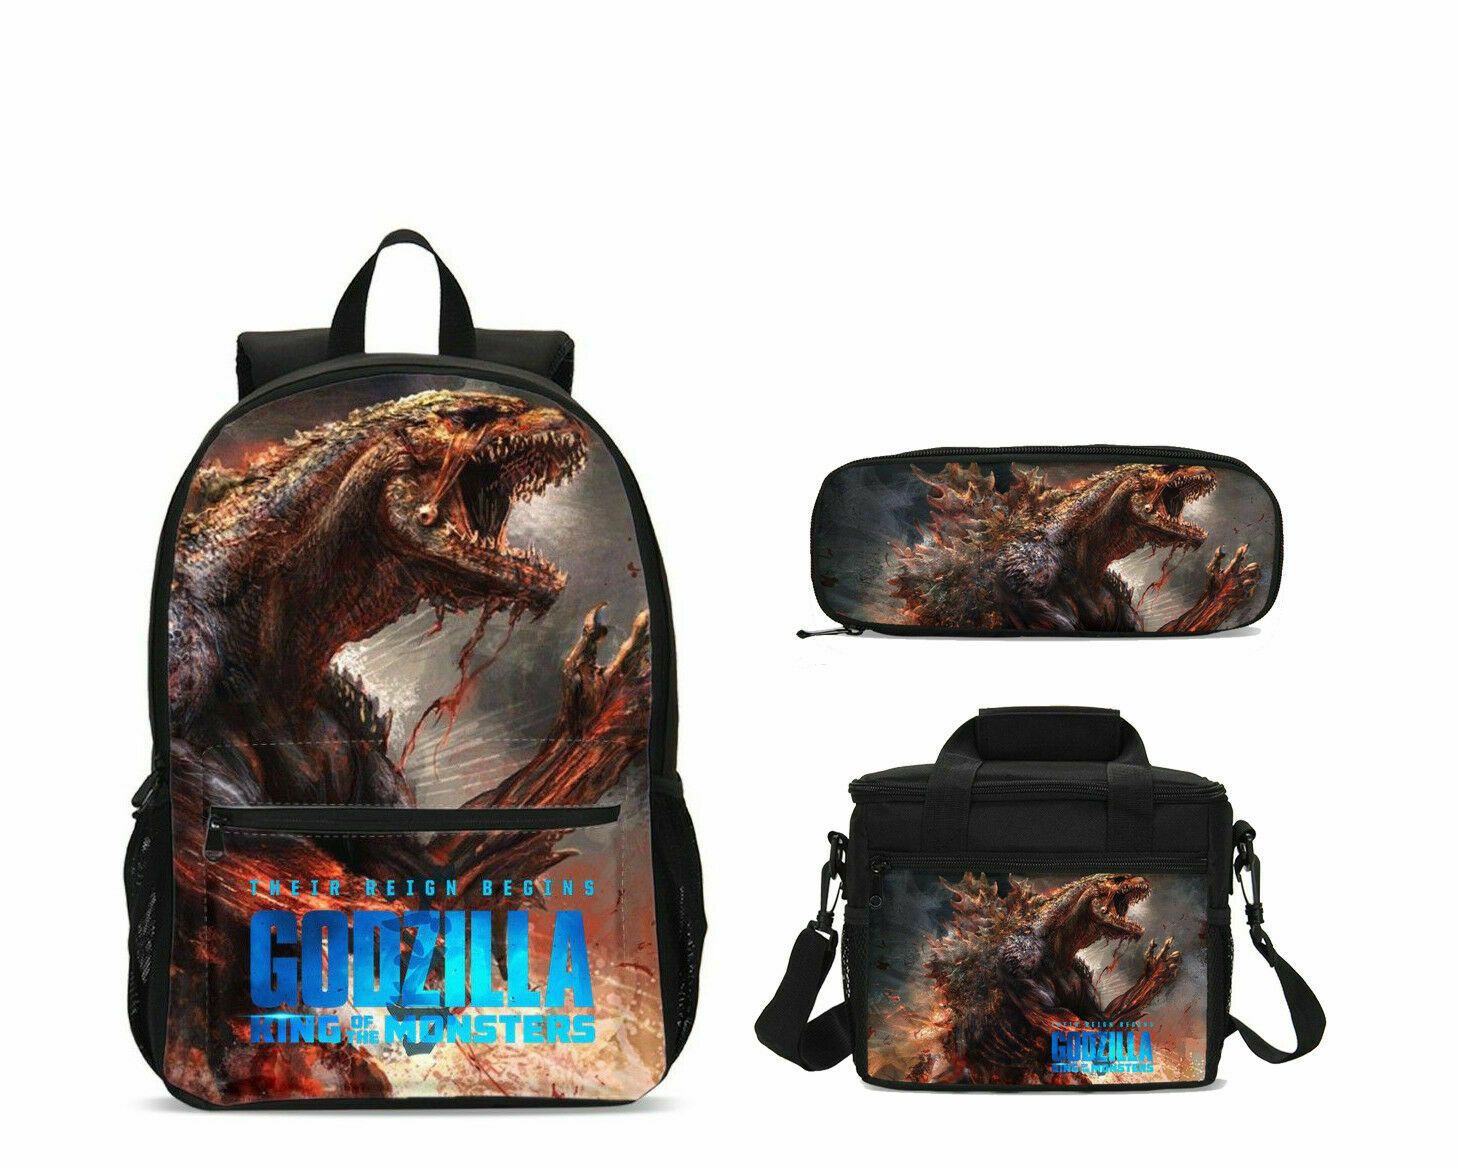 Godzilla King of the Monsters School Bag Backpack With Lunch Bag,Shoulder Bag, Pencil Case 4PCS - mihoodie